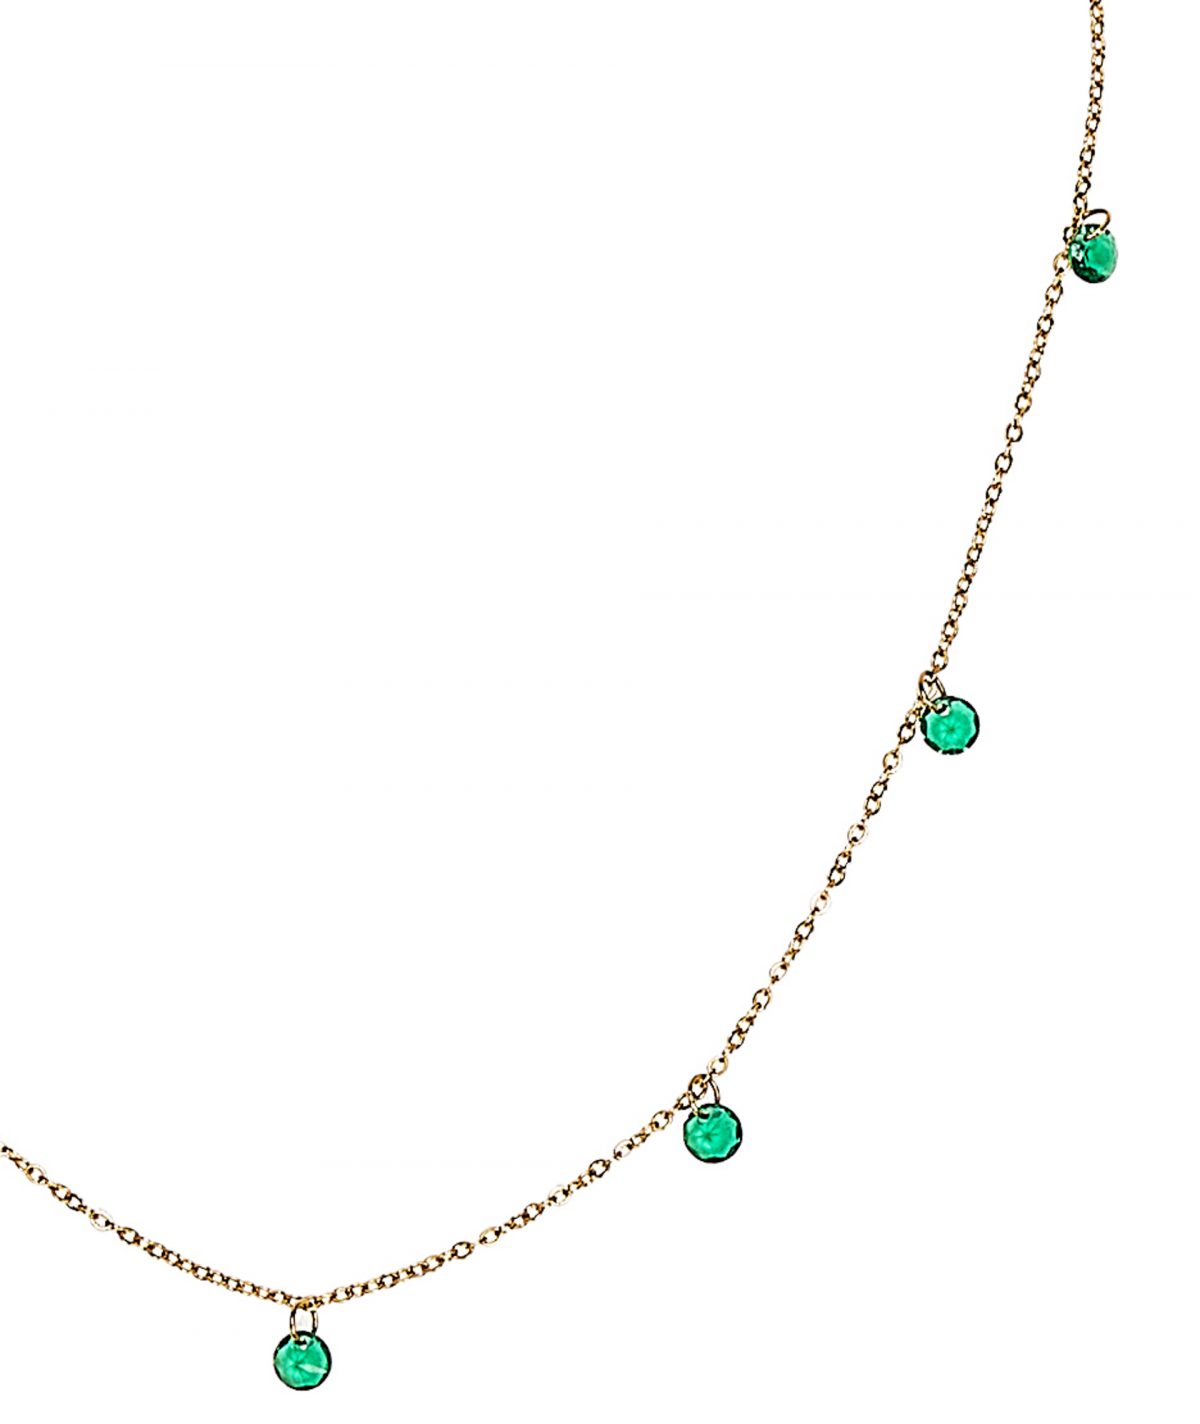 Round Mint Stones Necklace by TFD